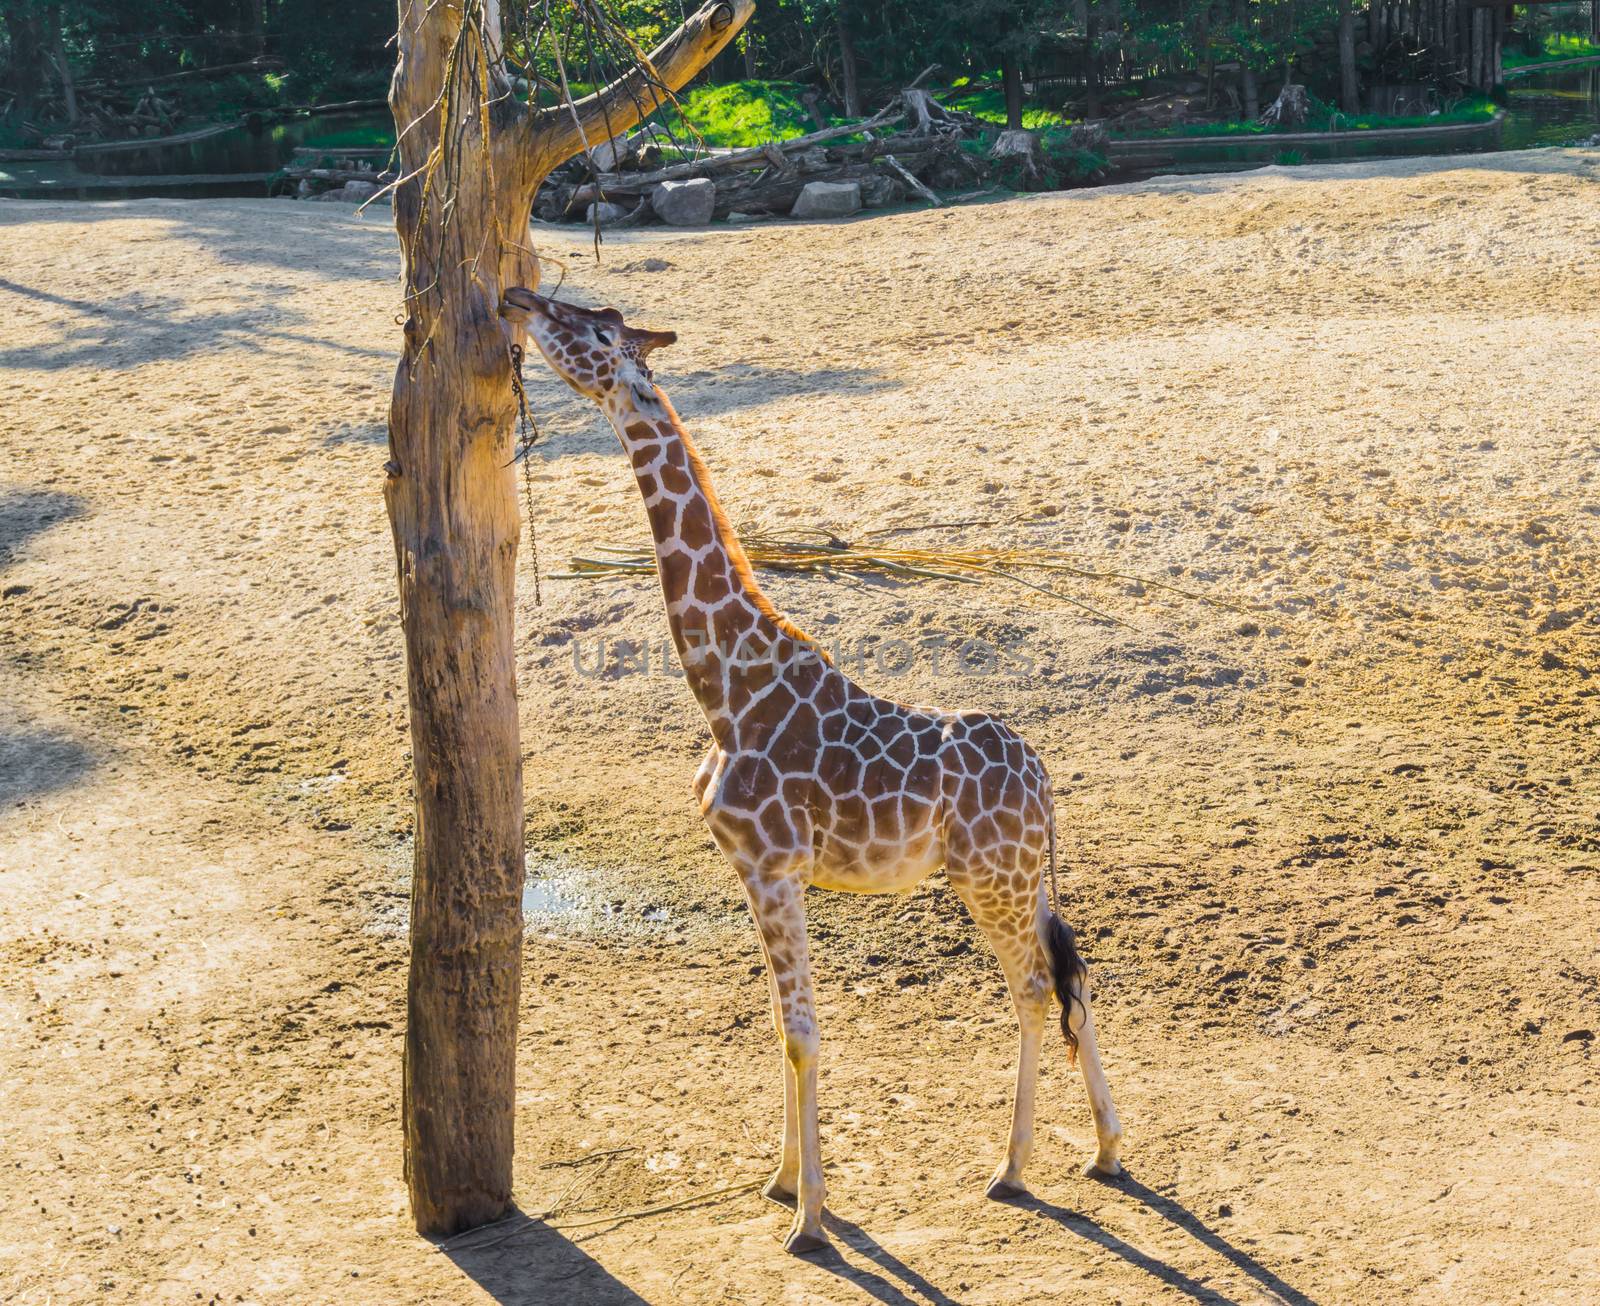 savanna animal portrait of a giraffe reaching and eating from a branch in a tree